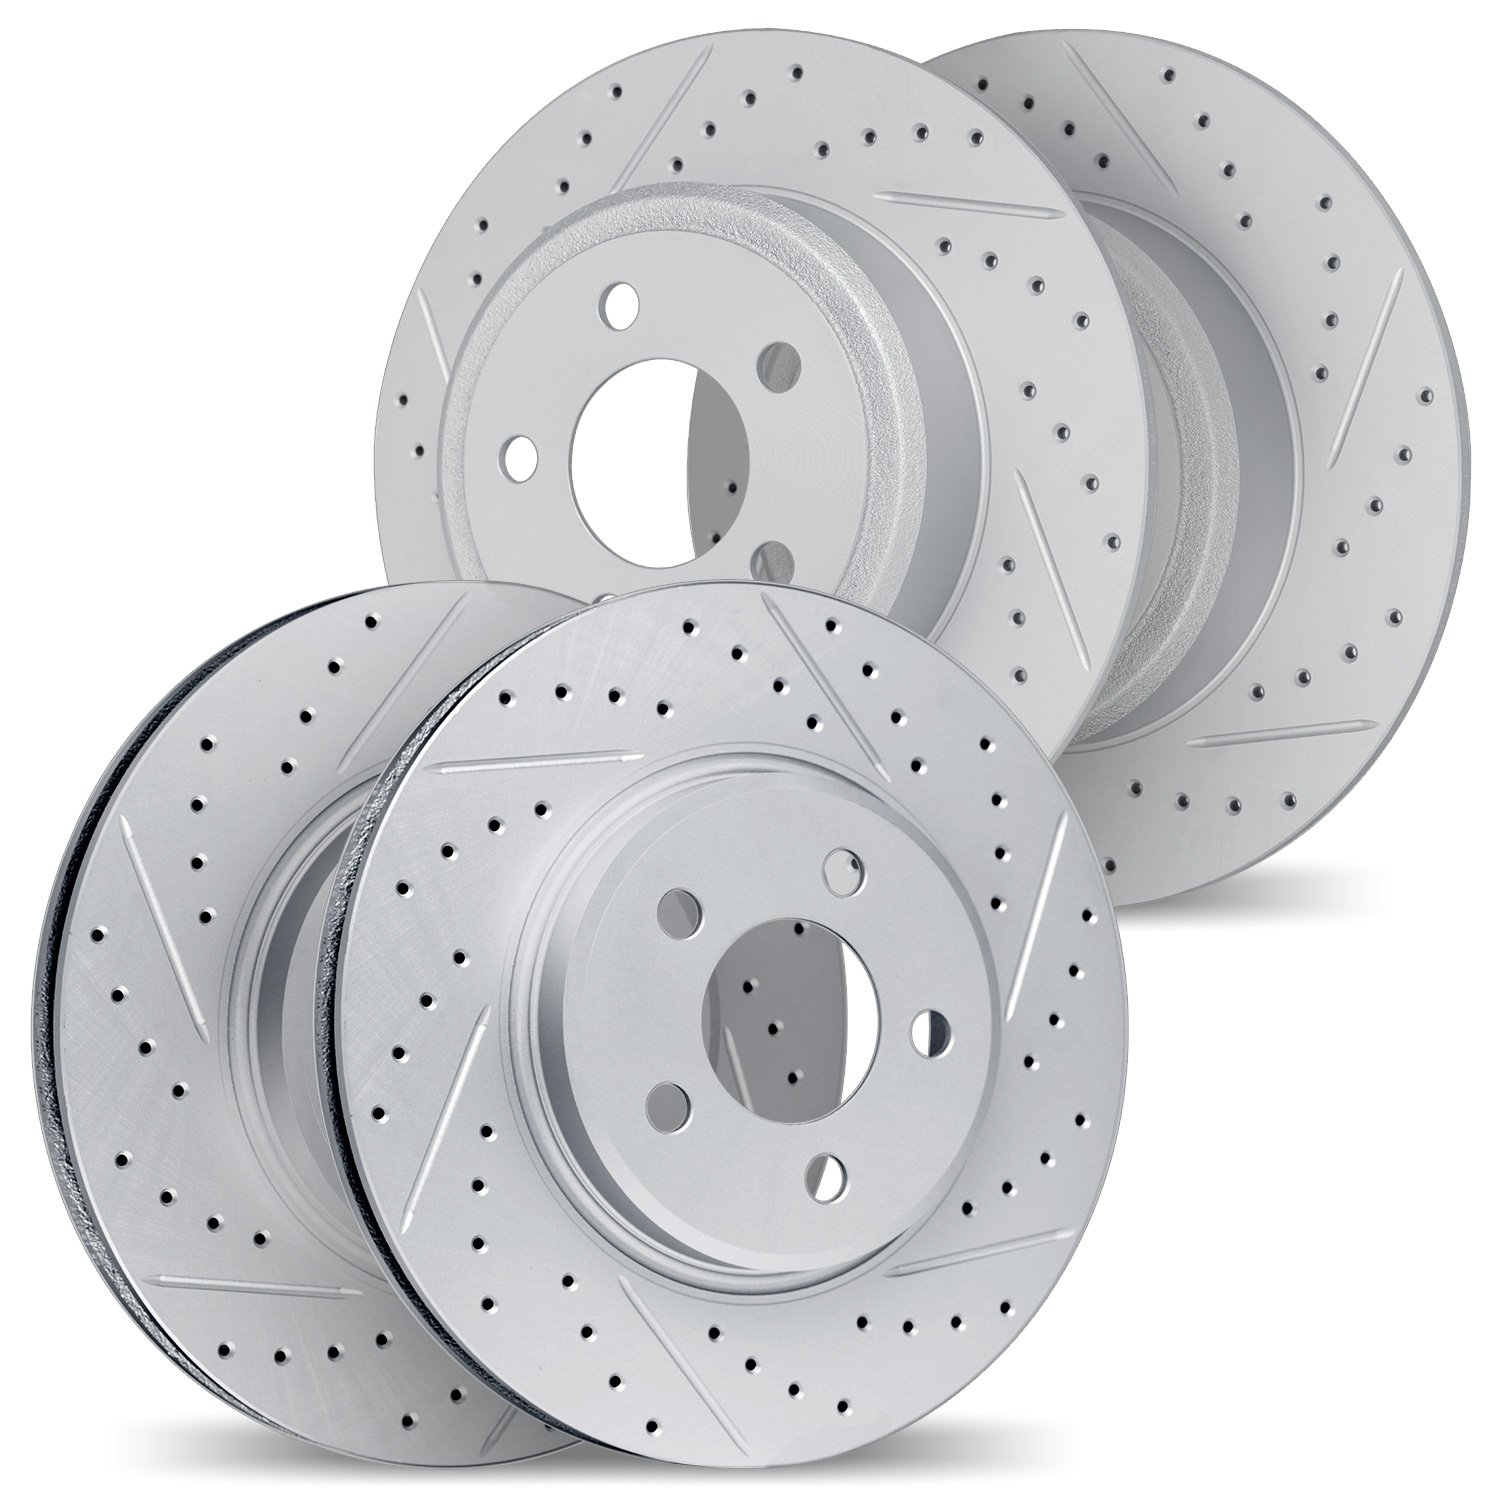 2004-03061 Geoperformance Drilled/Slotted Brake Rotors, 2010-2013 Kia/Hyundai/Genesis, Position: Front and Rear